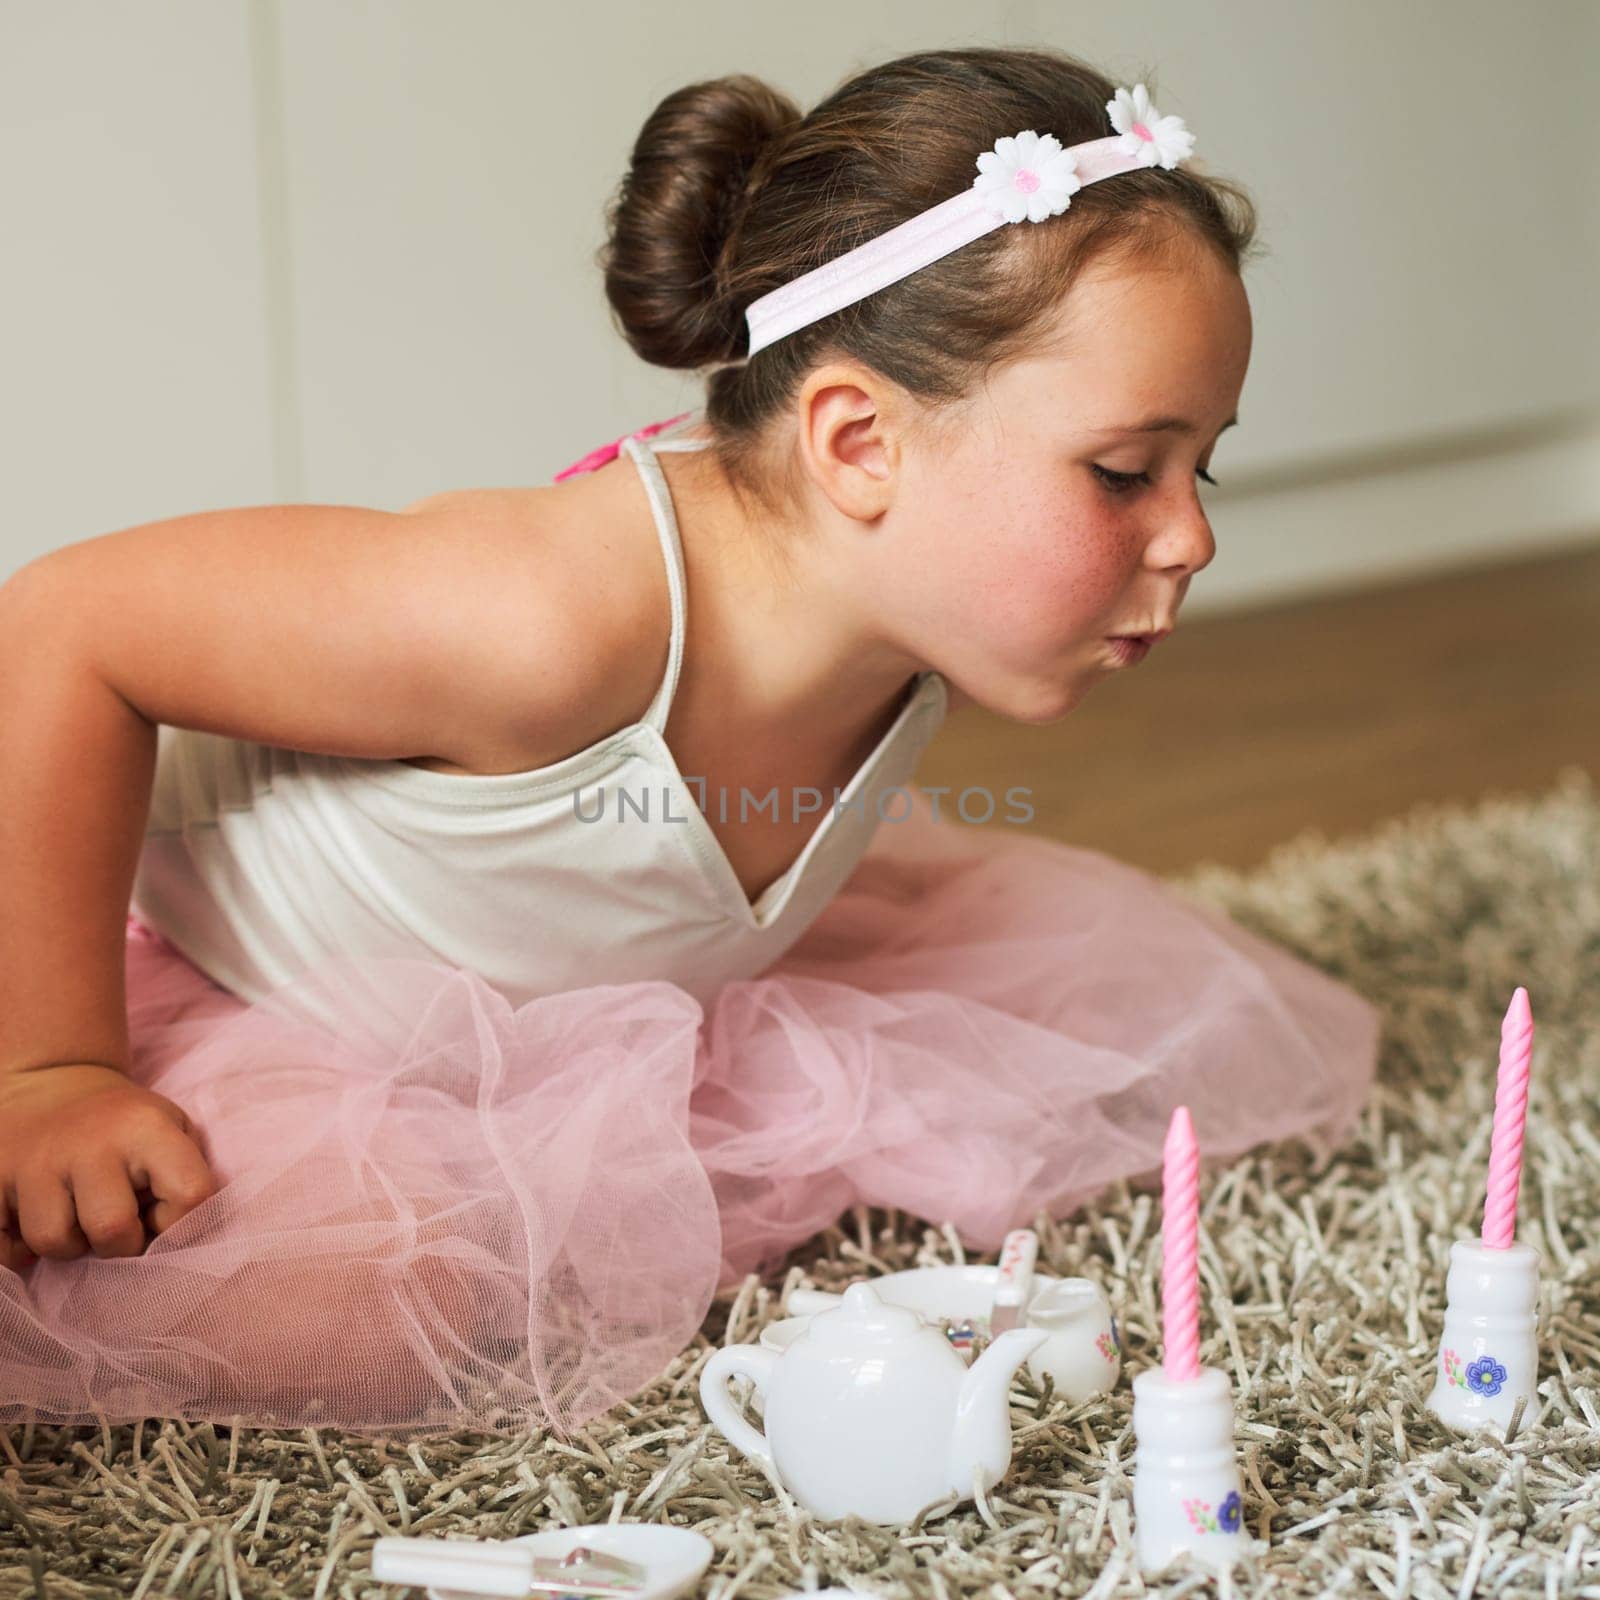 As girly as girlhood gets. an adorable little girl having a make believe party at home